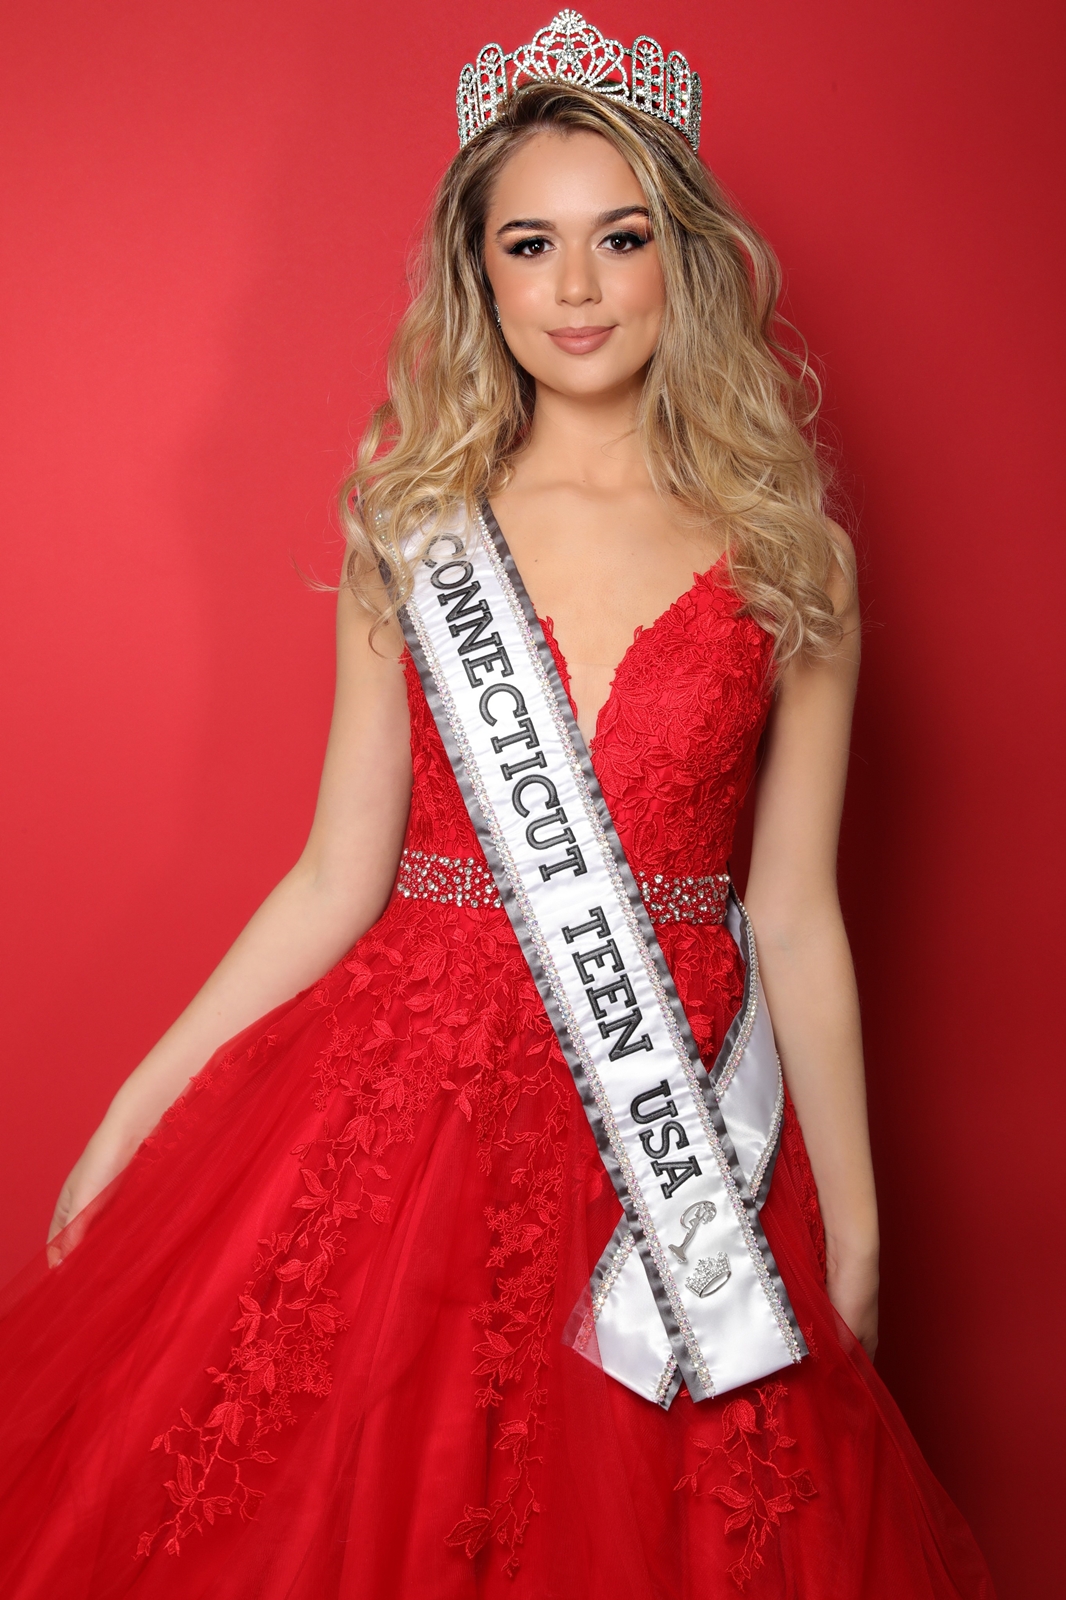 Humanity in Crisis Miss Connecticut Teen USA 2020 Leads Human